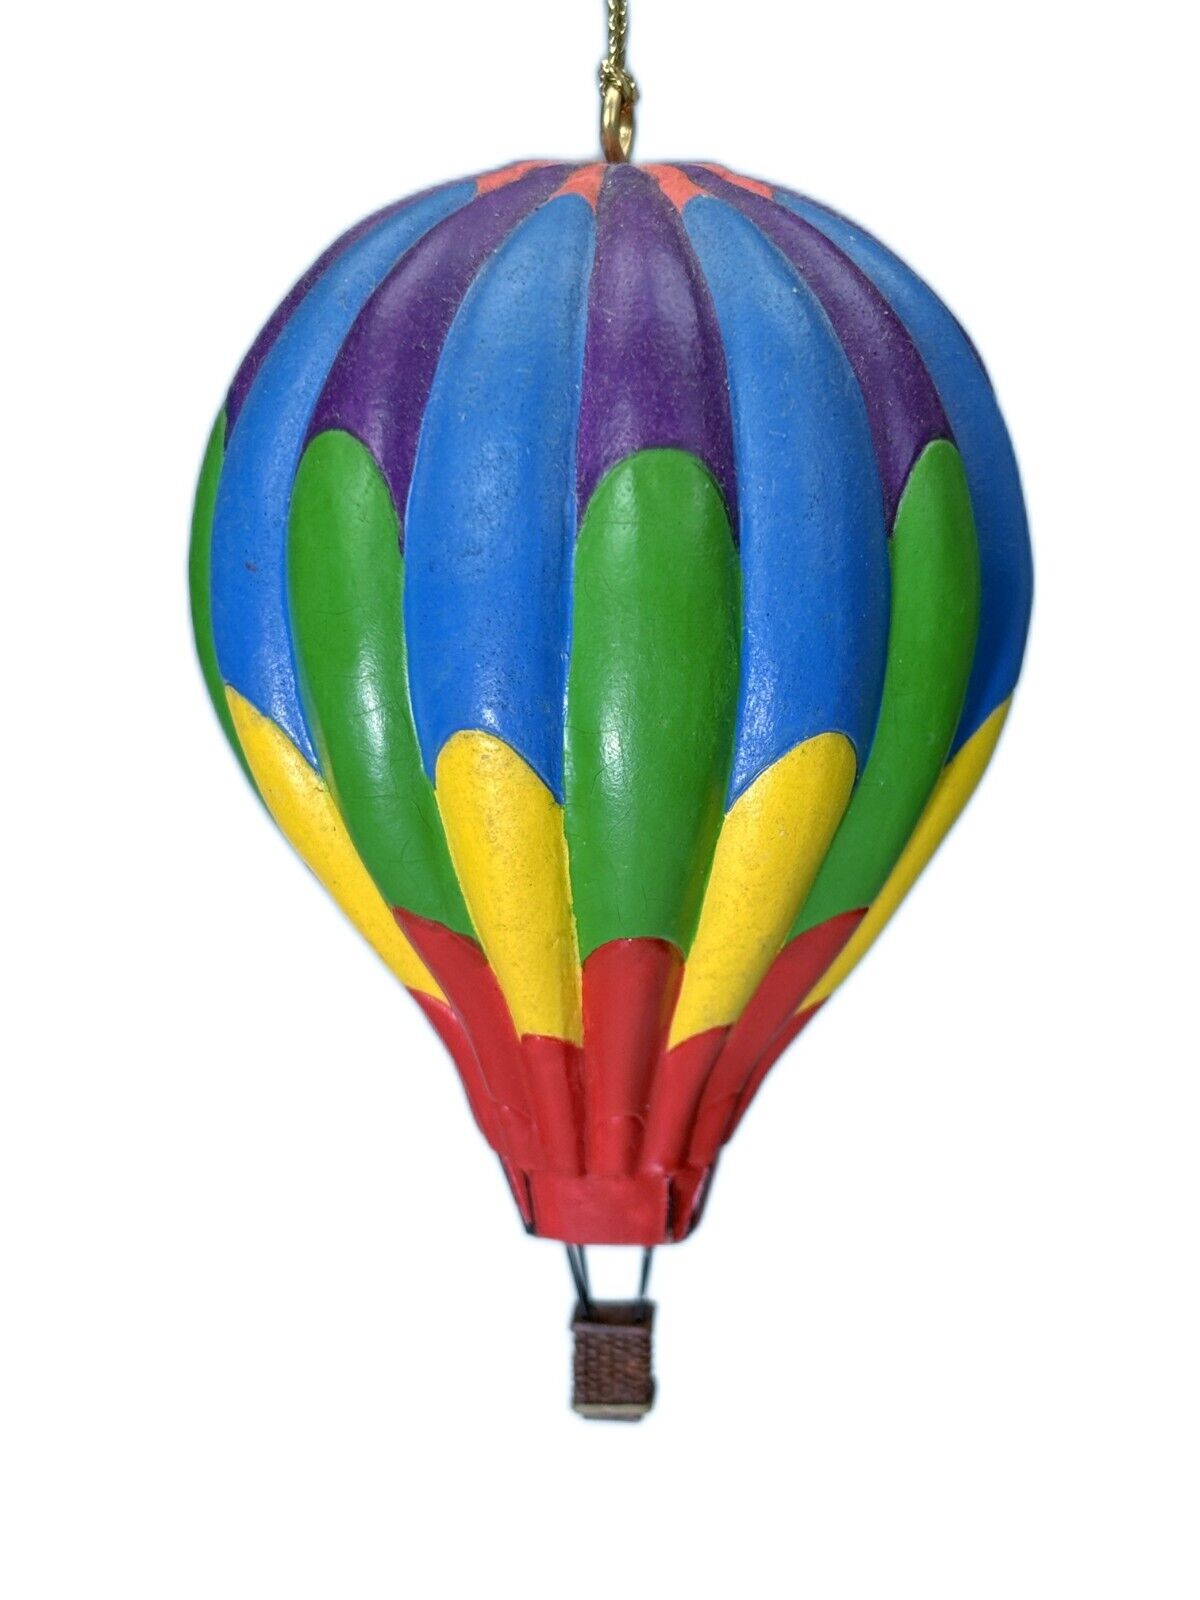 3.5” Hot Air Balloon Painted Wood Christmas Ornament Hanging Colorful